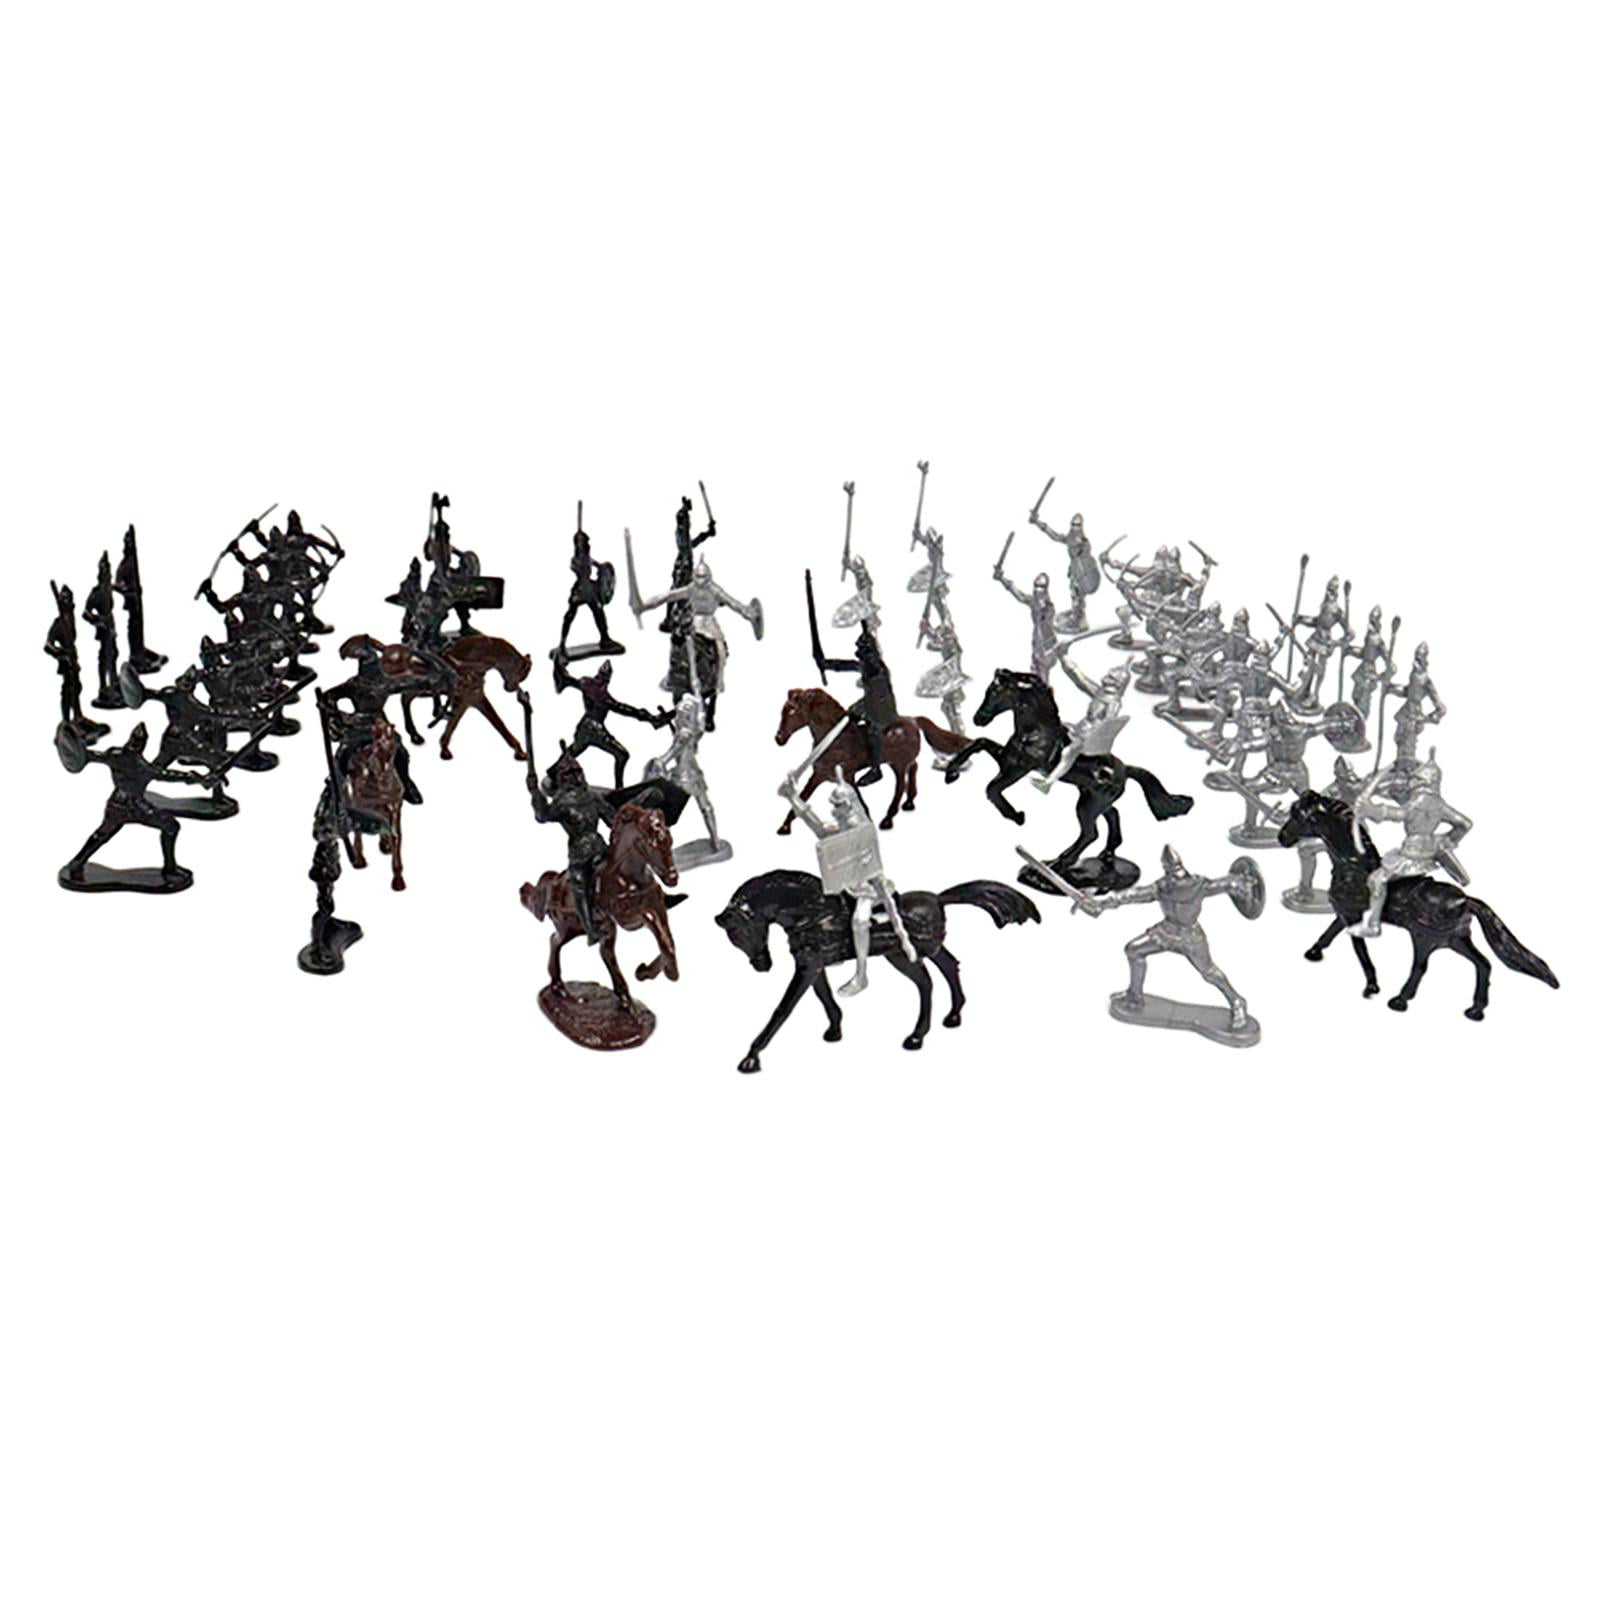 Medieval Knights Warriors Soldiers Figures Toy Kids Toy Figures Static Model